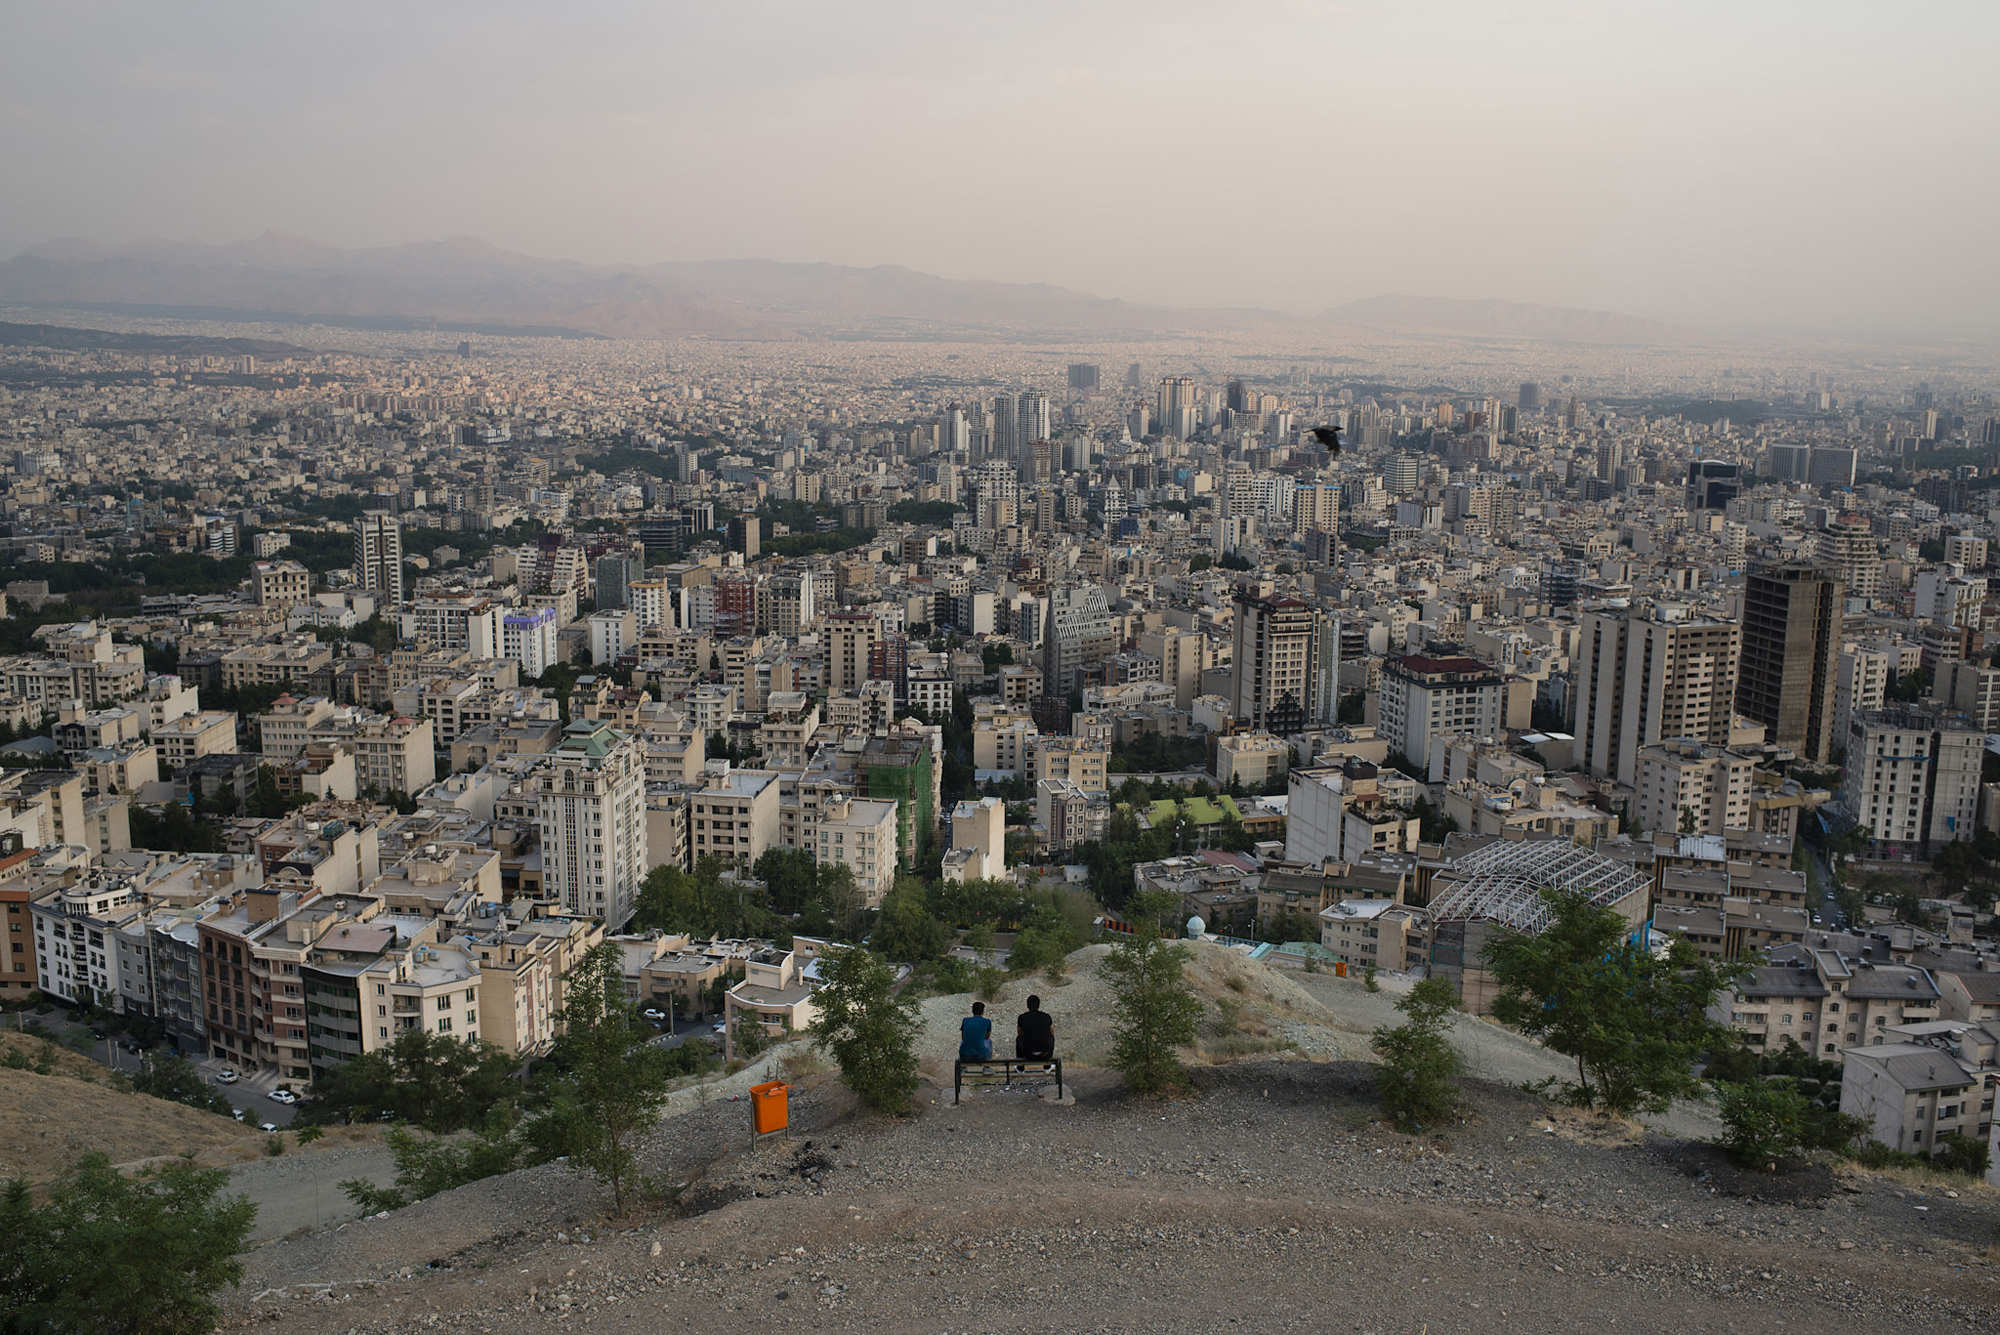 An overview of Tehran, July 7.